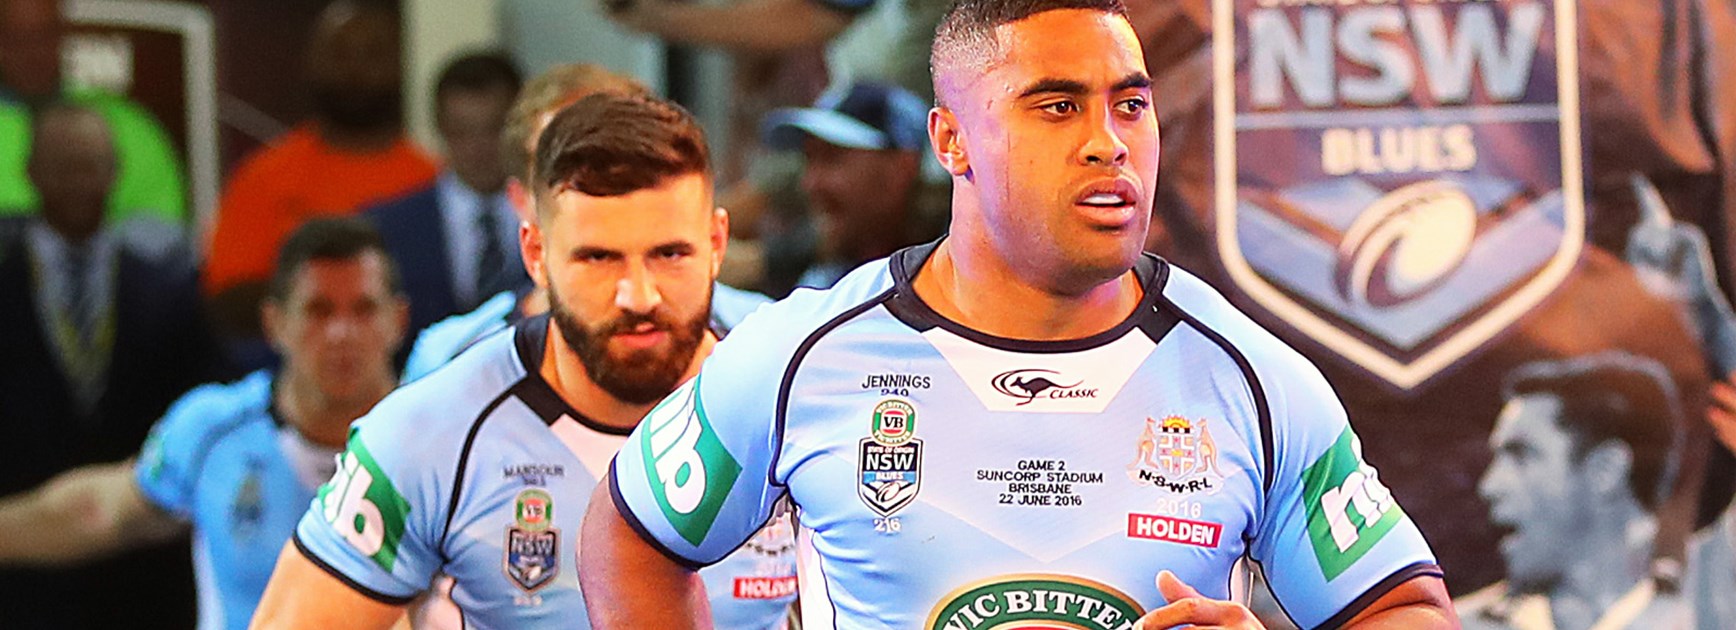 Michael Jennings is embracing a leadership role with NSW.